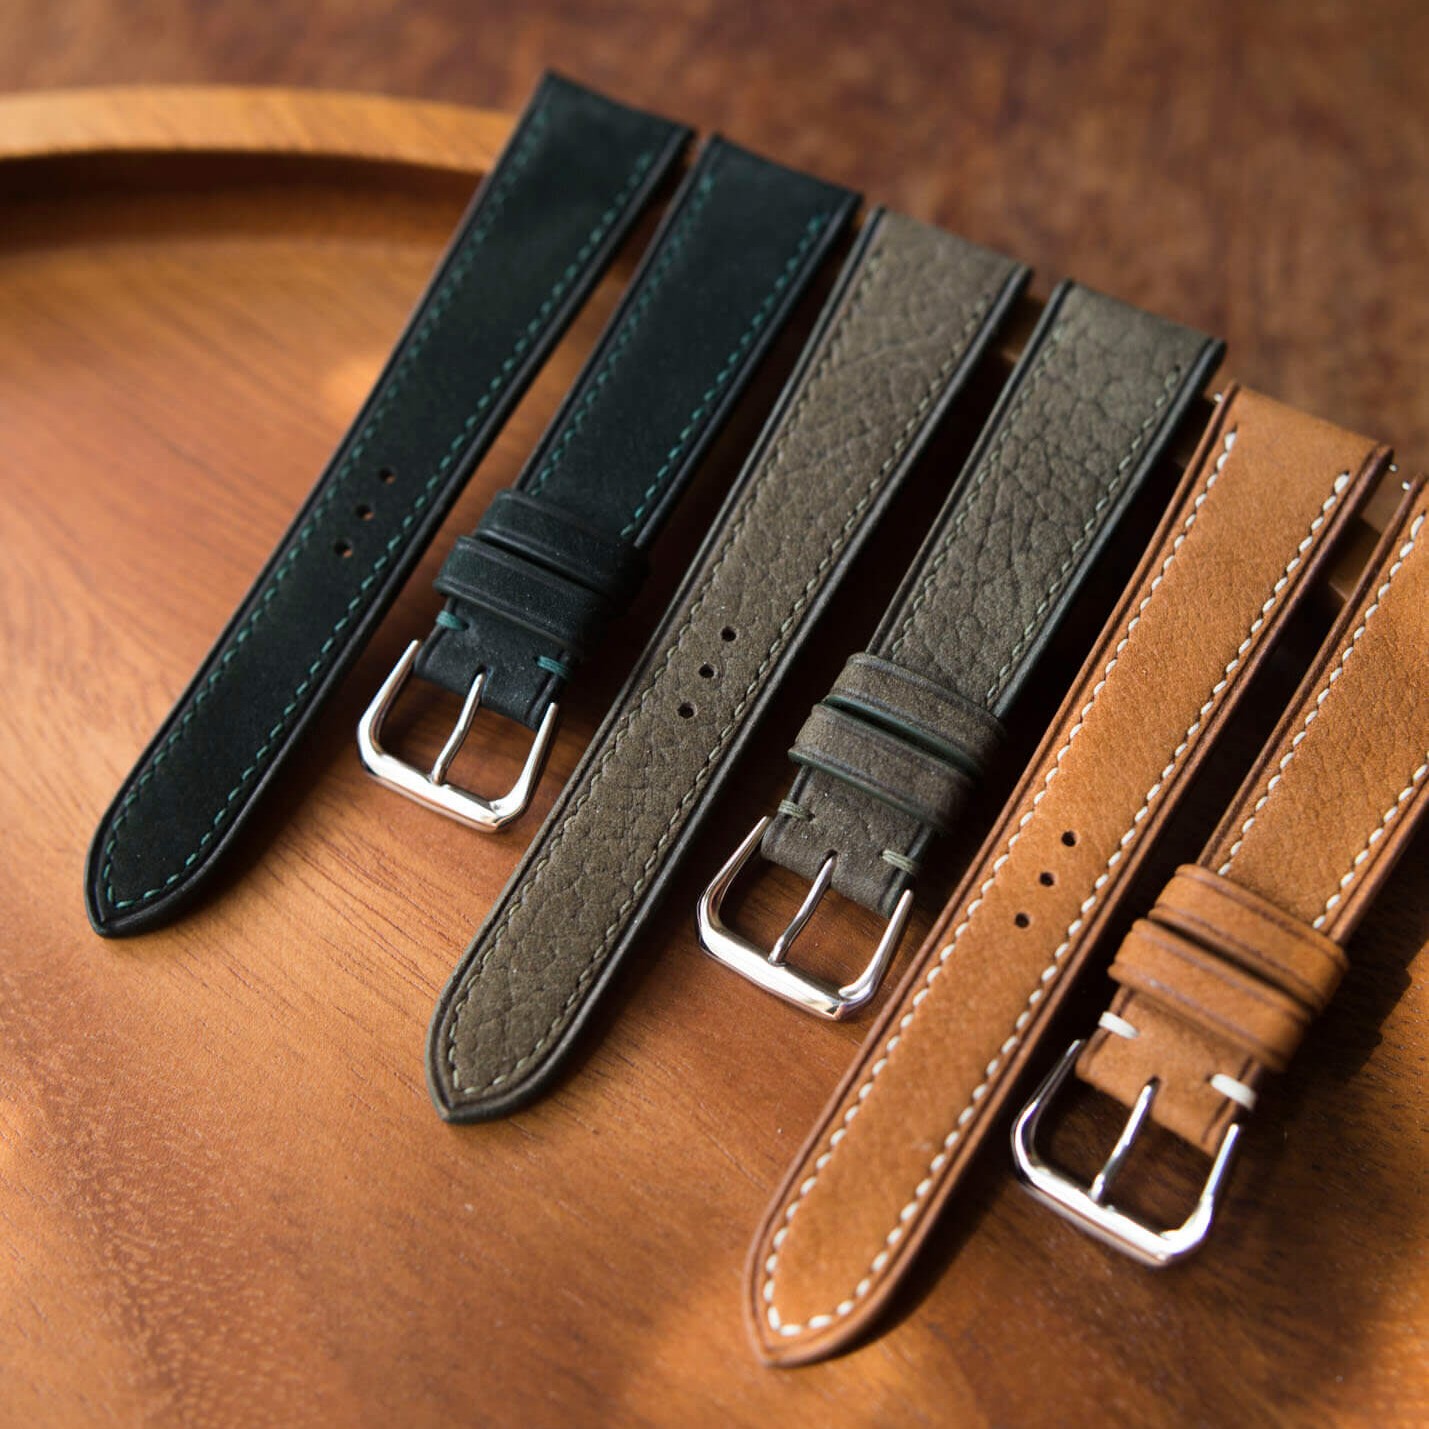 Black, green, and tan color leather watch bands by mill handmade